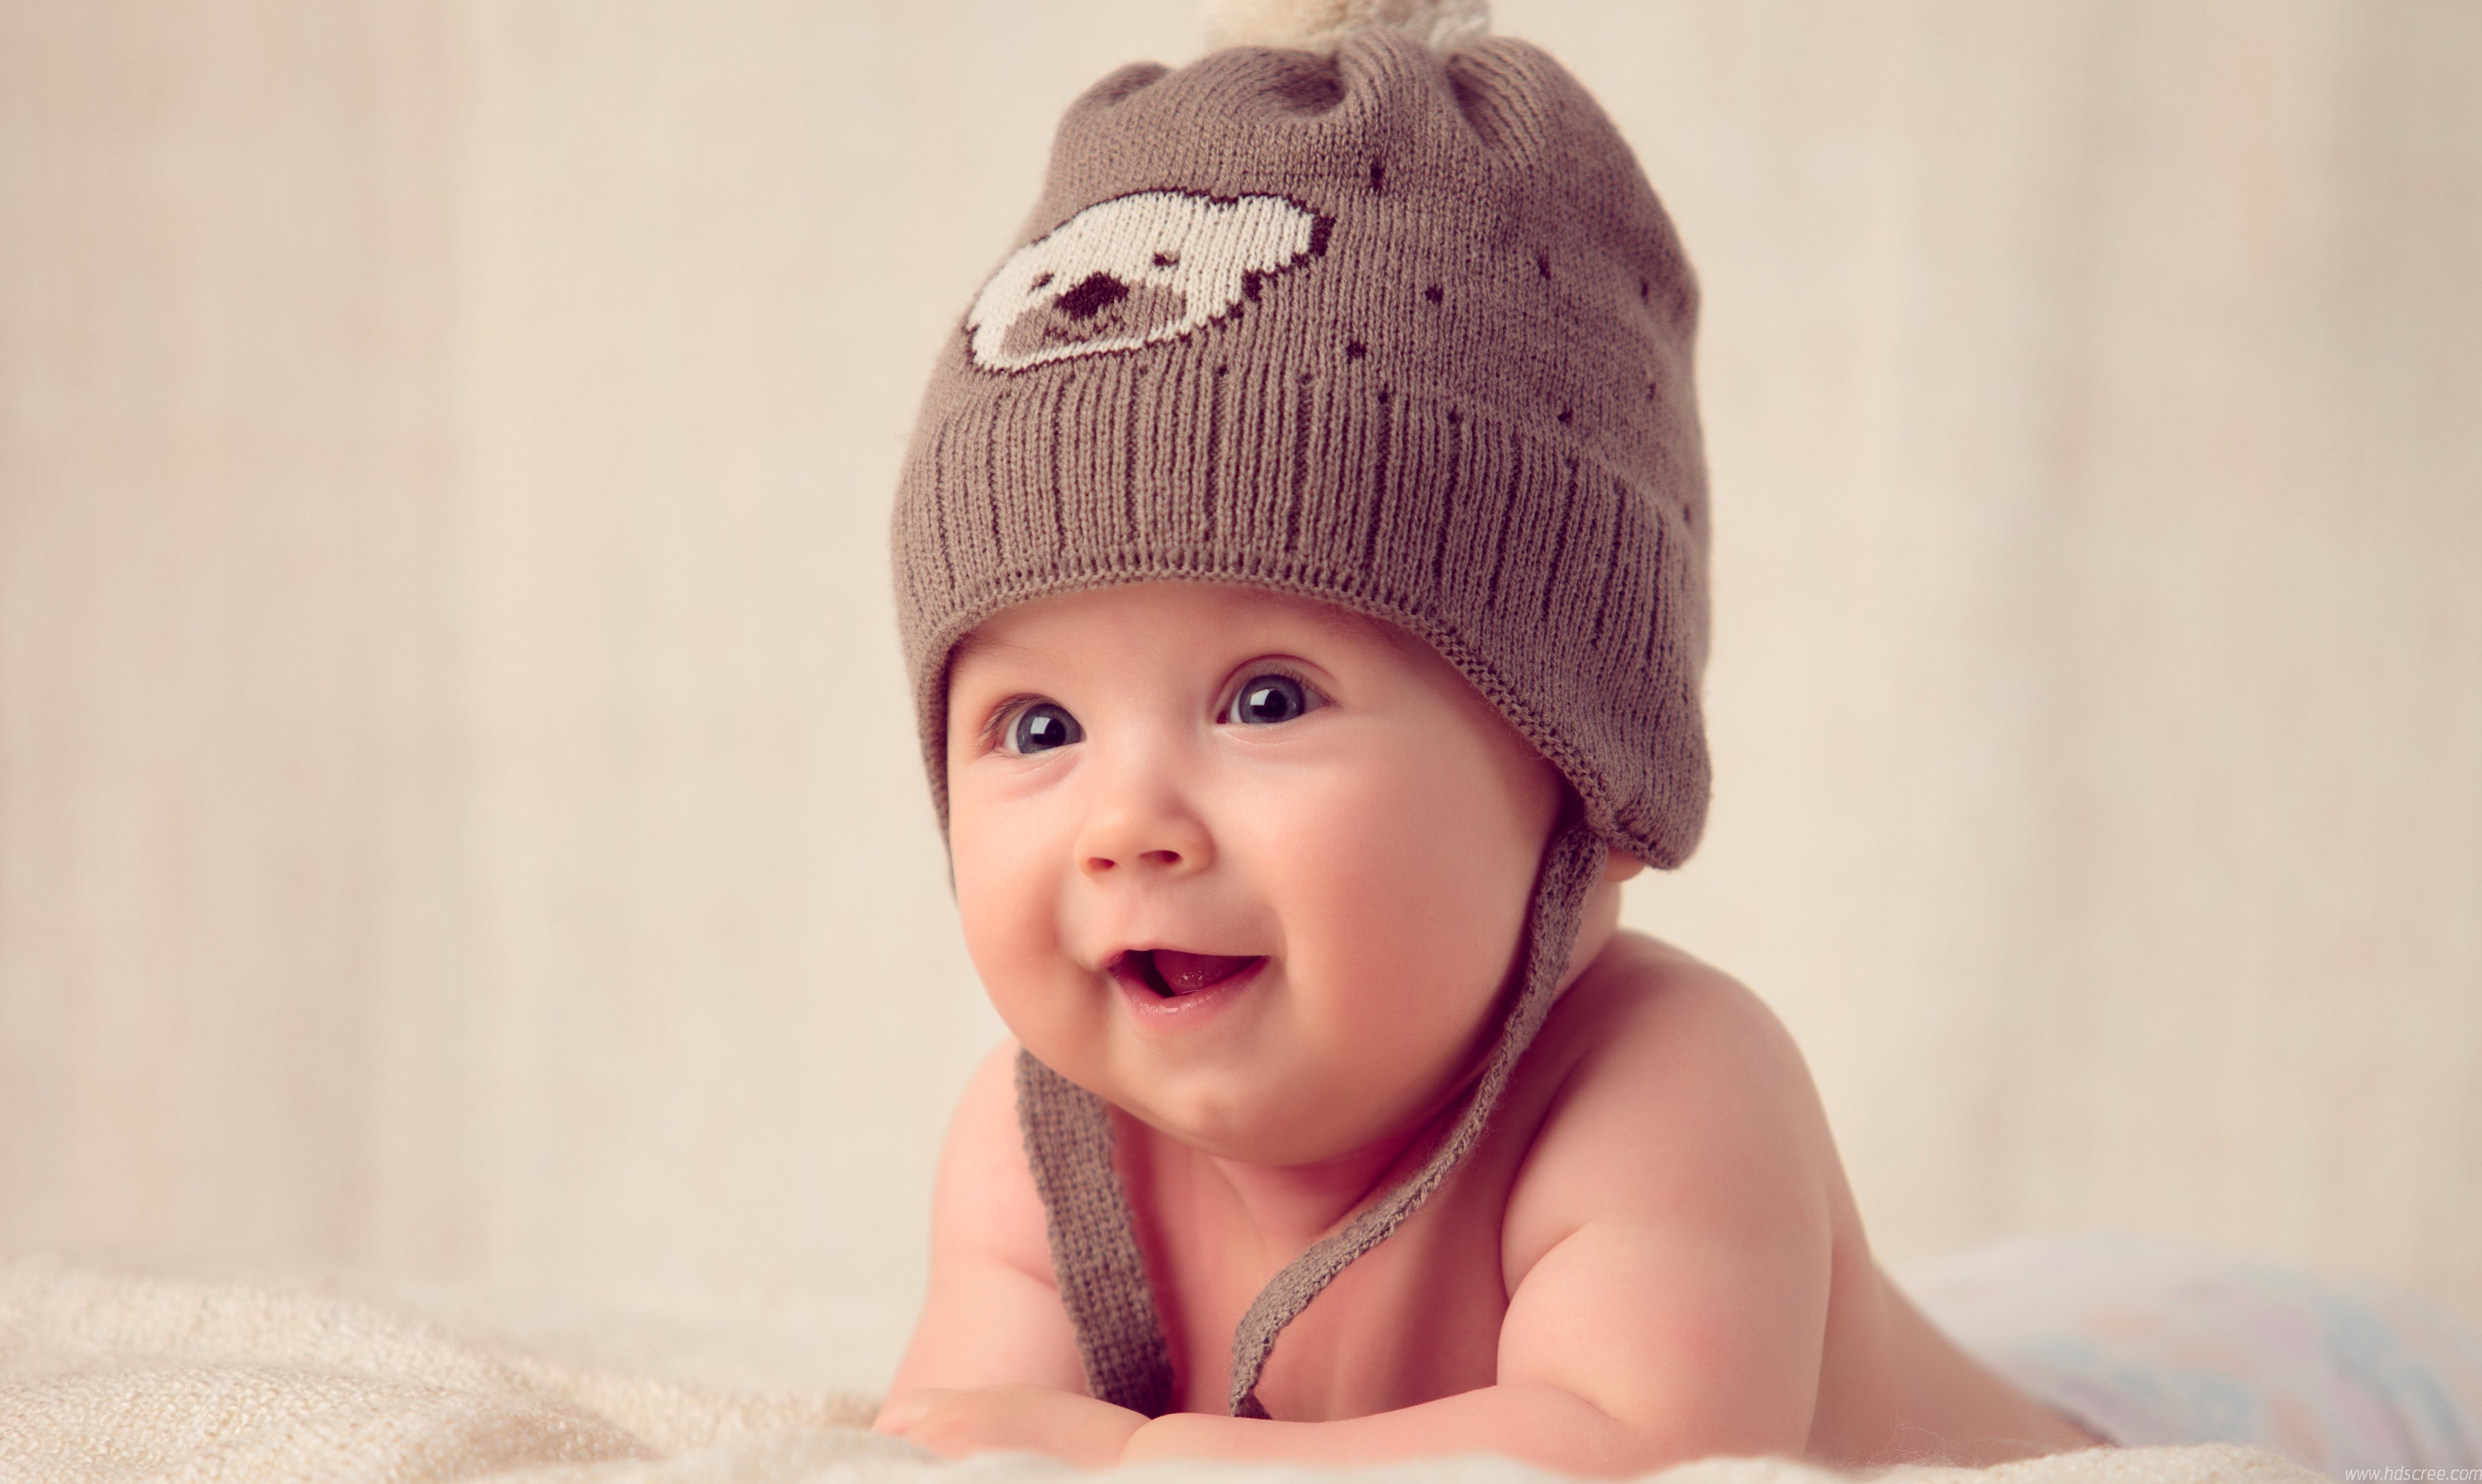 3612x2160 download-cute-baby-with-hat-cap-wallpaper